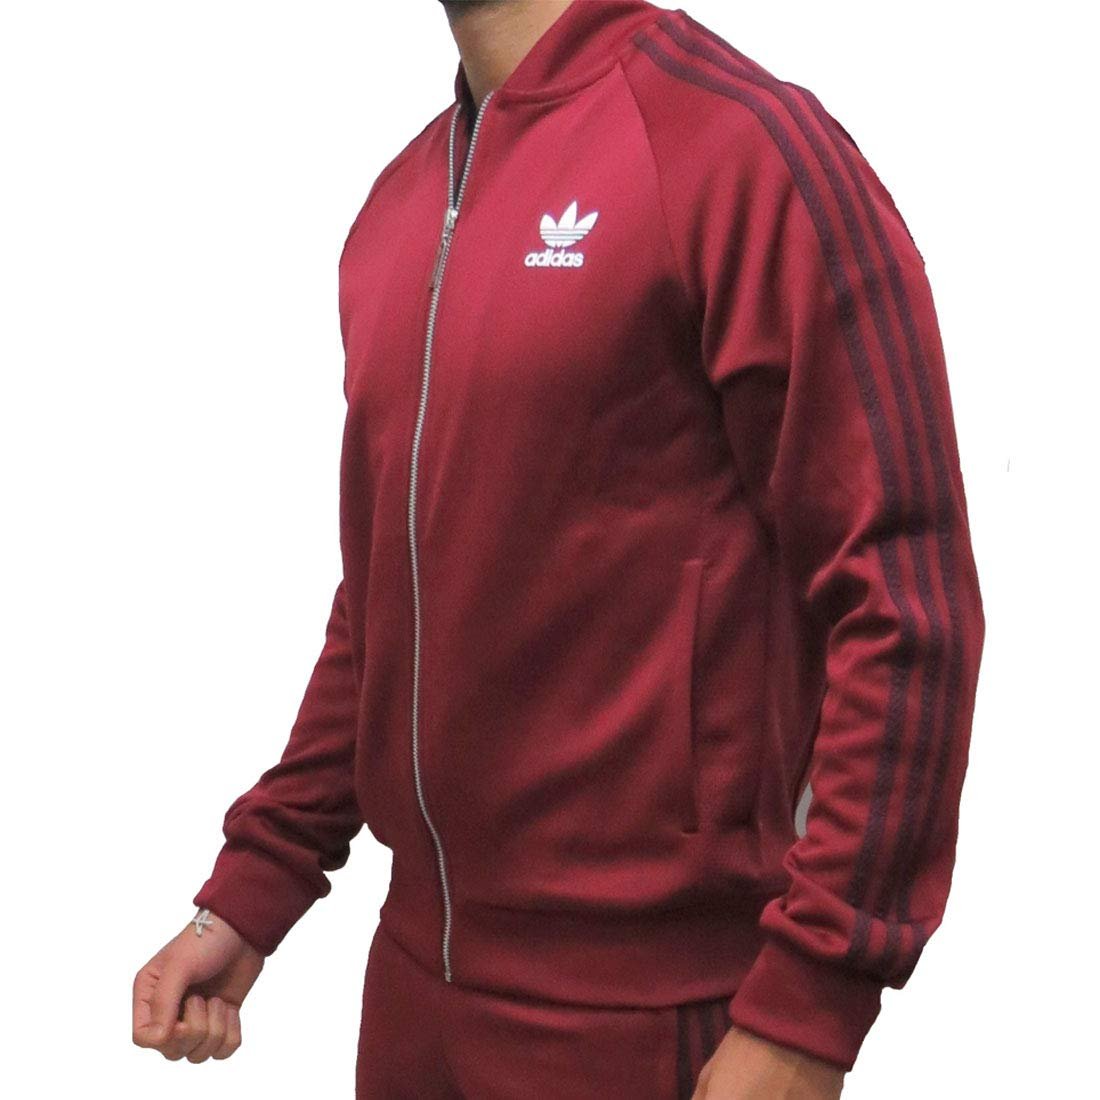 Adidas Tracksuit 90 Red